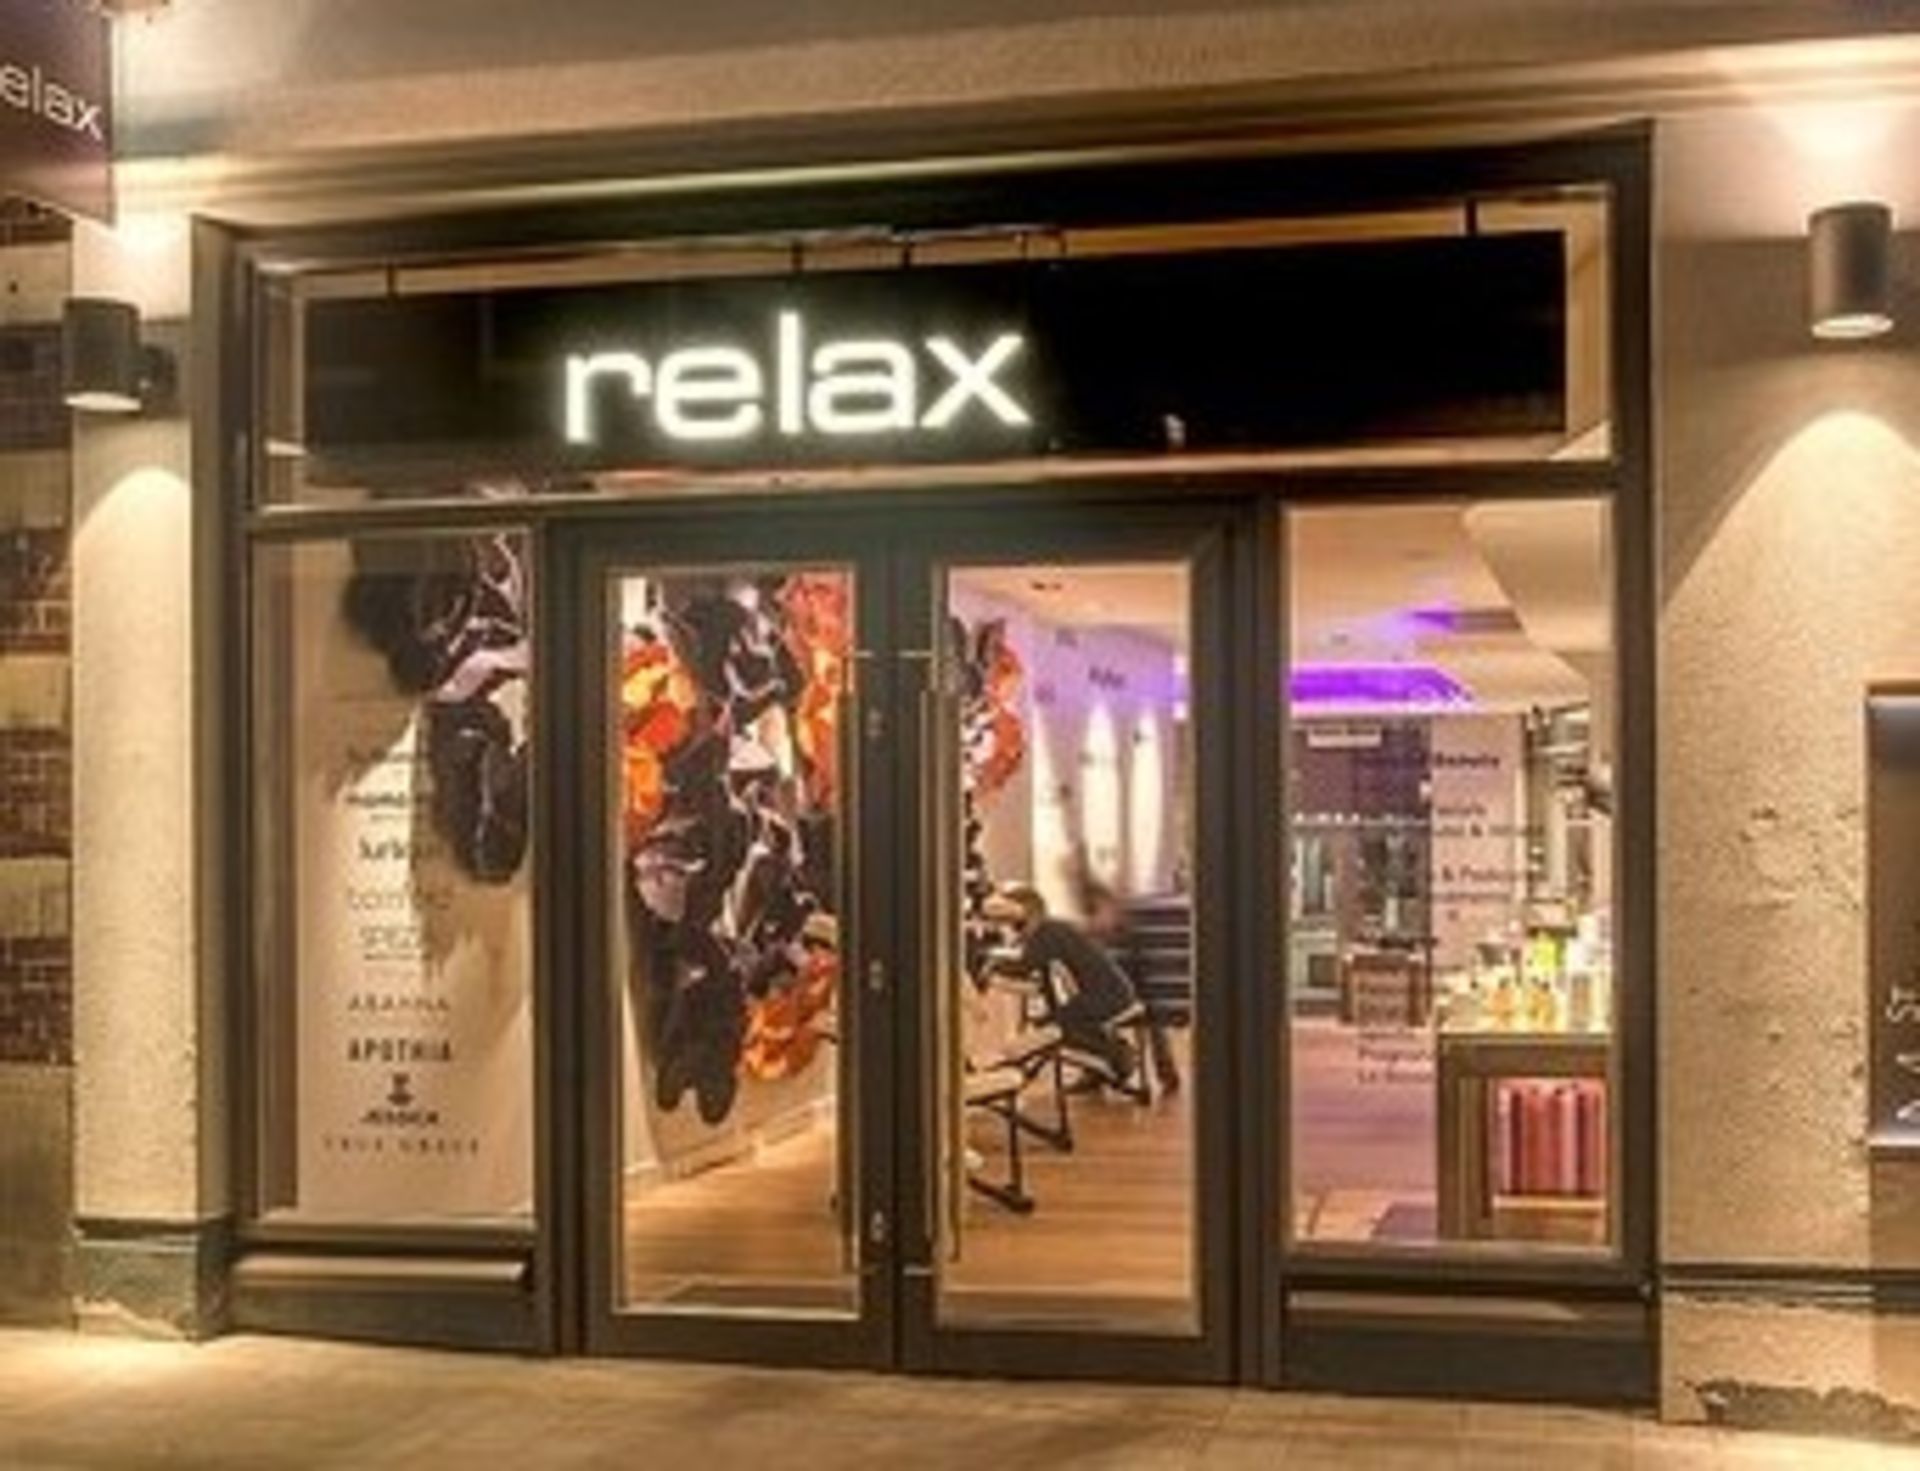 1 x Cool White RELAX Advertisement Illuminated Signage - Individual Perspex Letters Mounted on Rails - Image 2 of 5